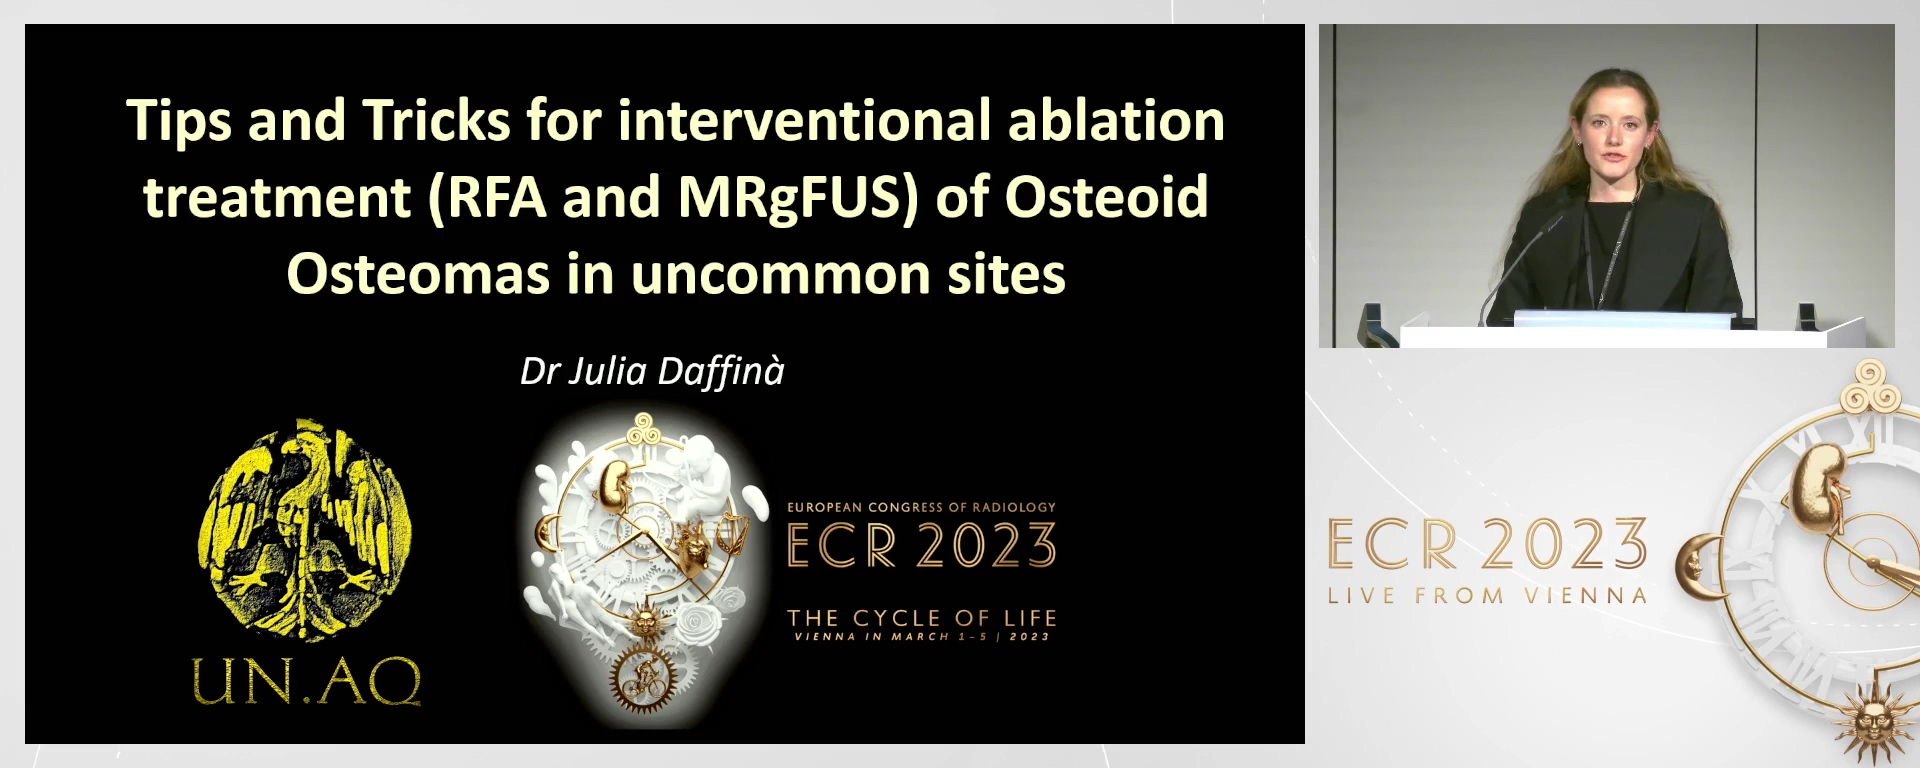 Tips and tricks for interventional ablation treatment (RFA and MRgFUS) of osteoid osteomas in uncommon sites